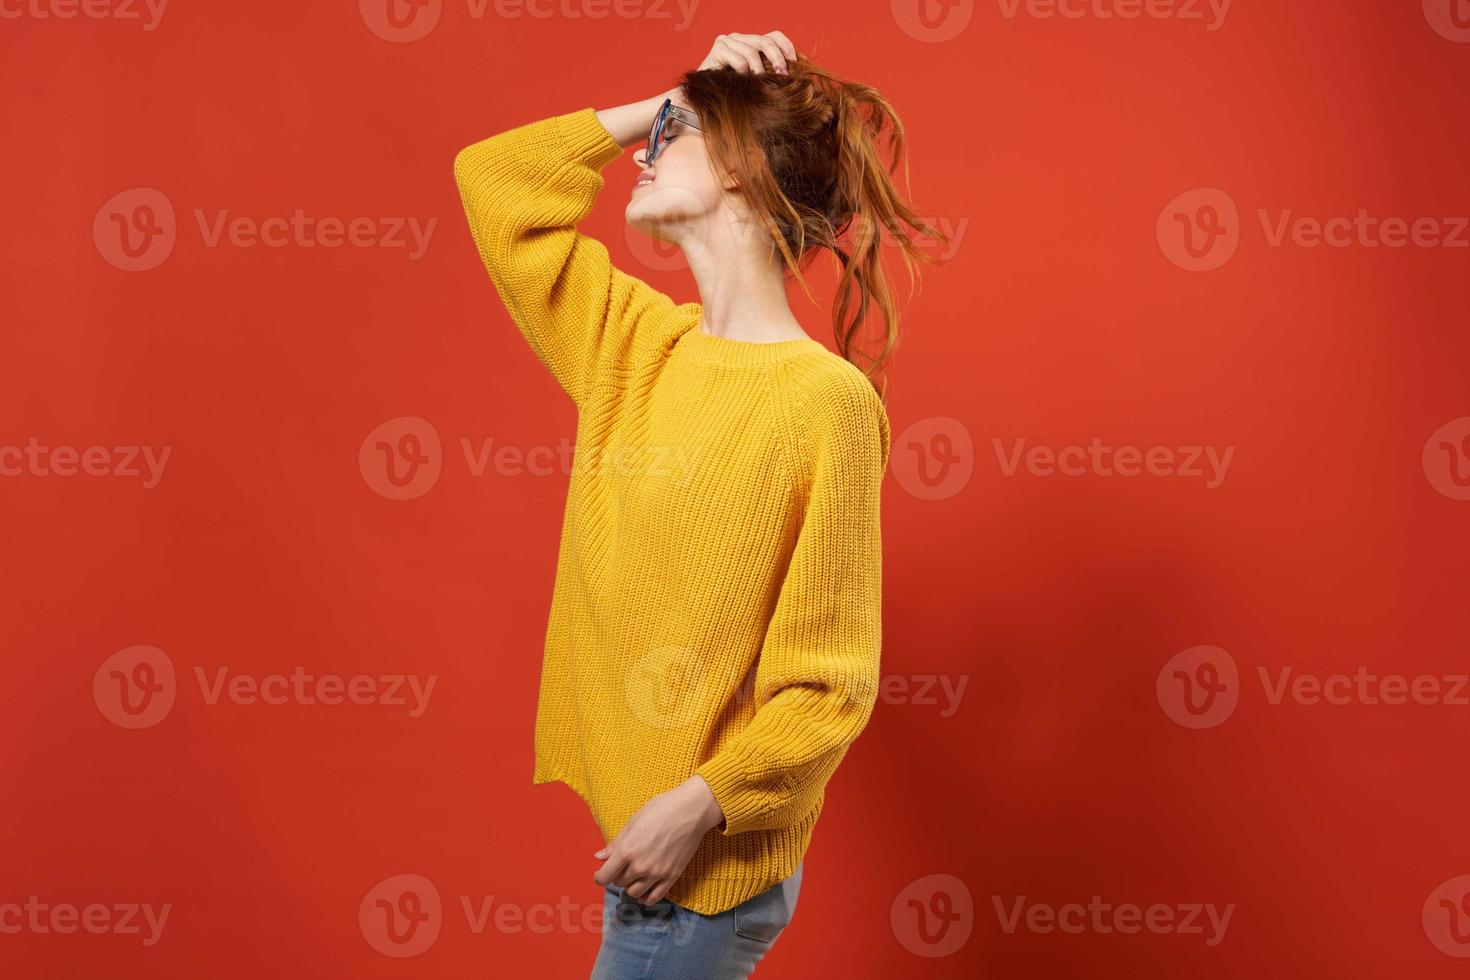 woman in yellow sweater posing blue glasses fashion photo